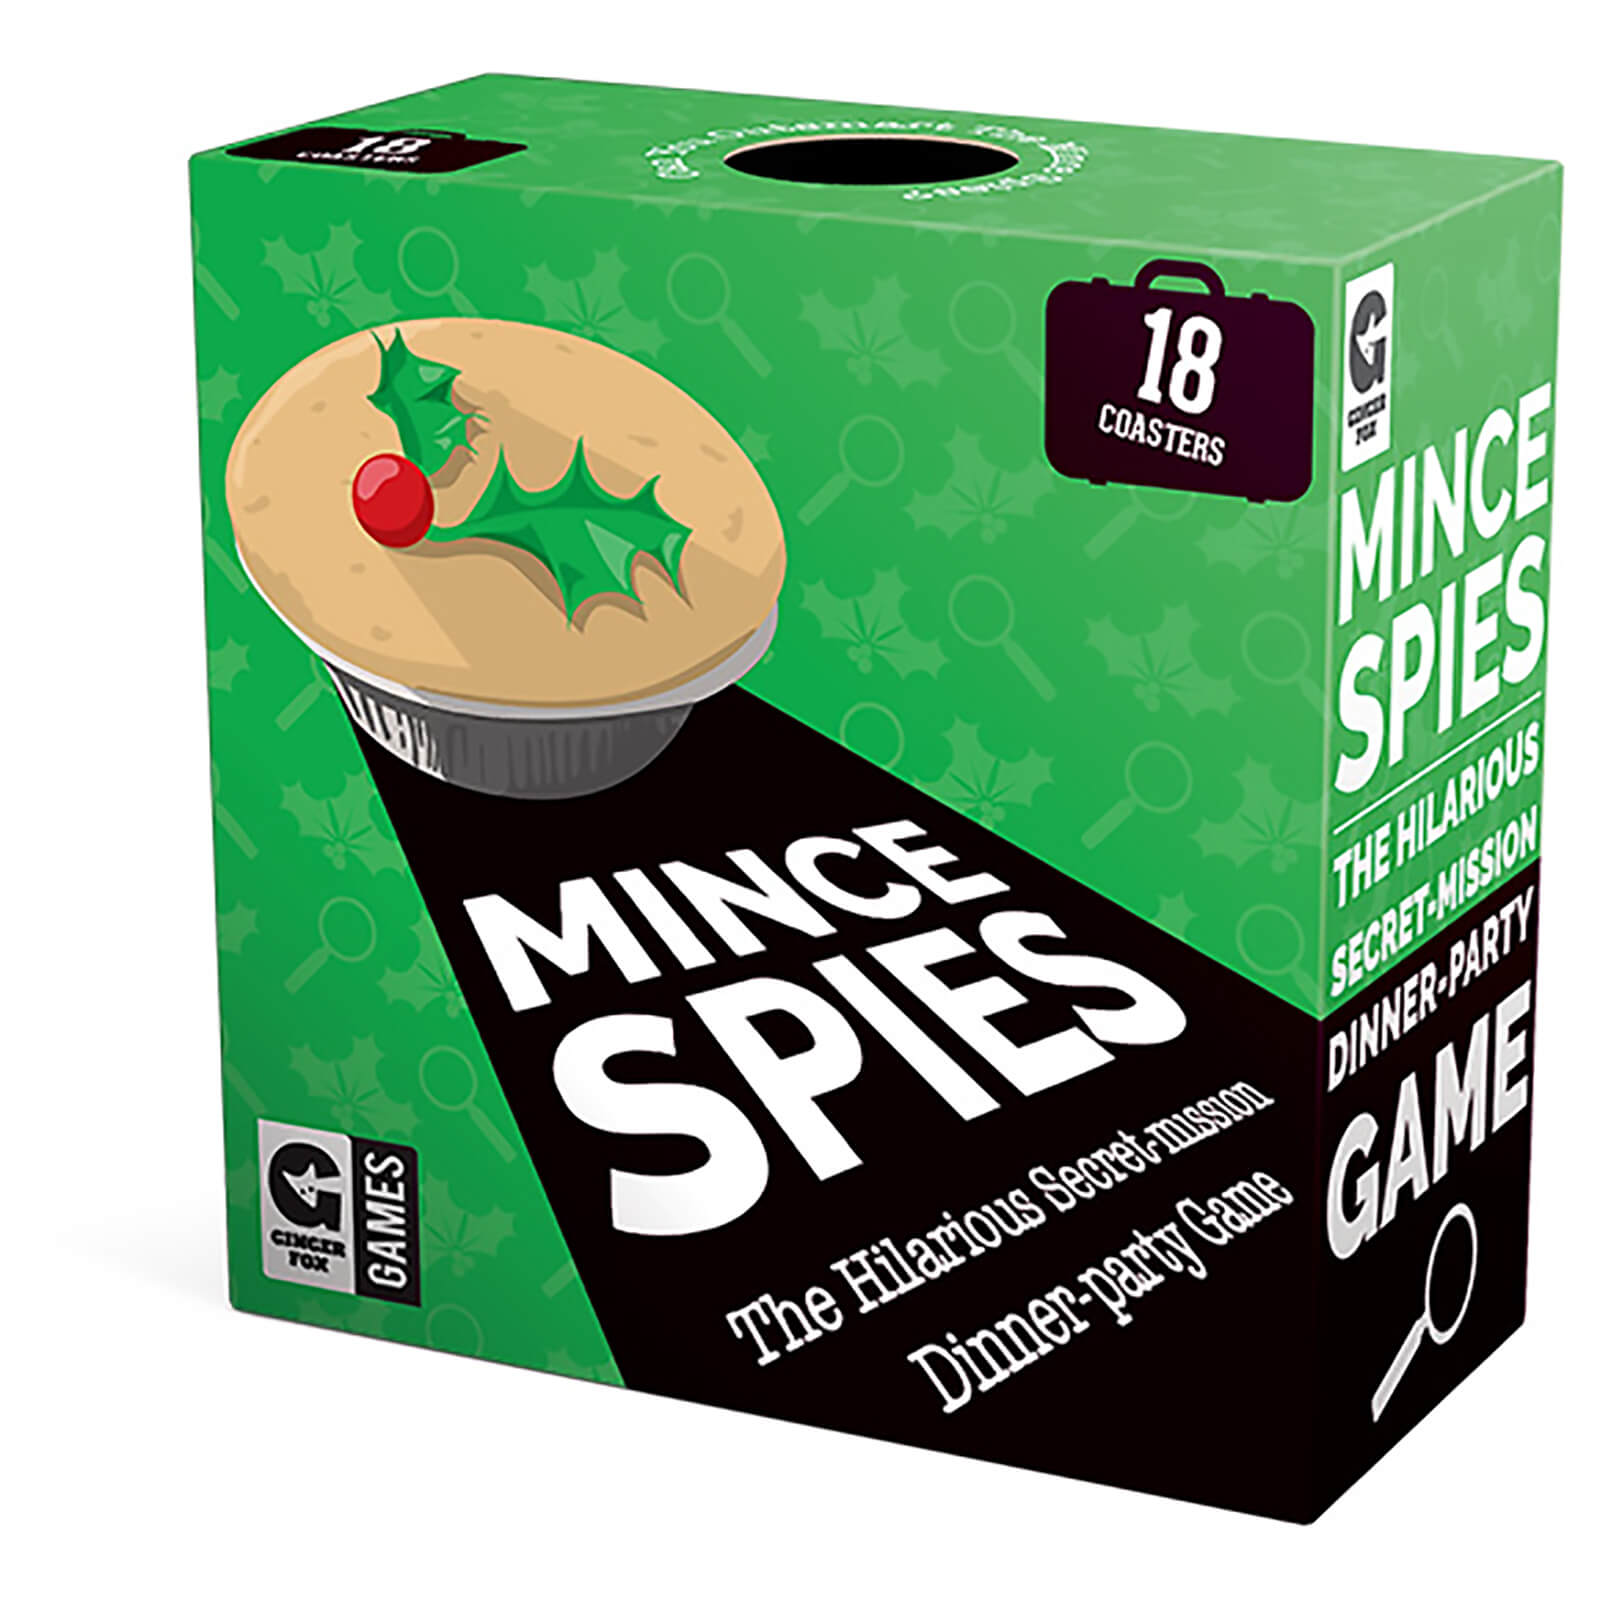 Image of Mince Spies Game